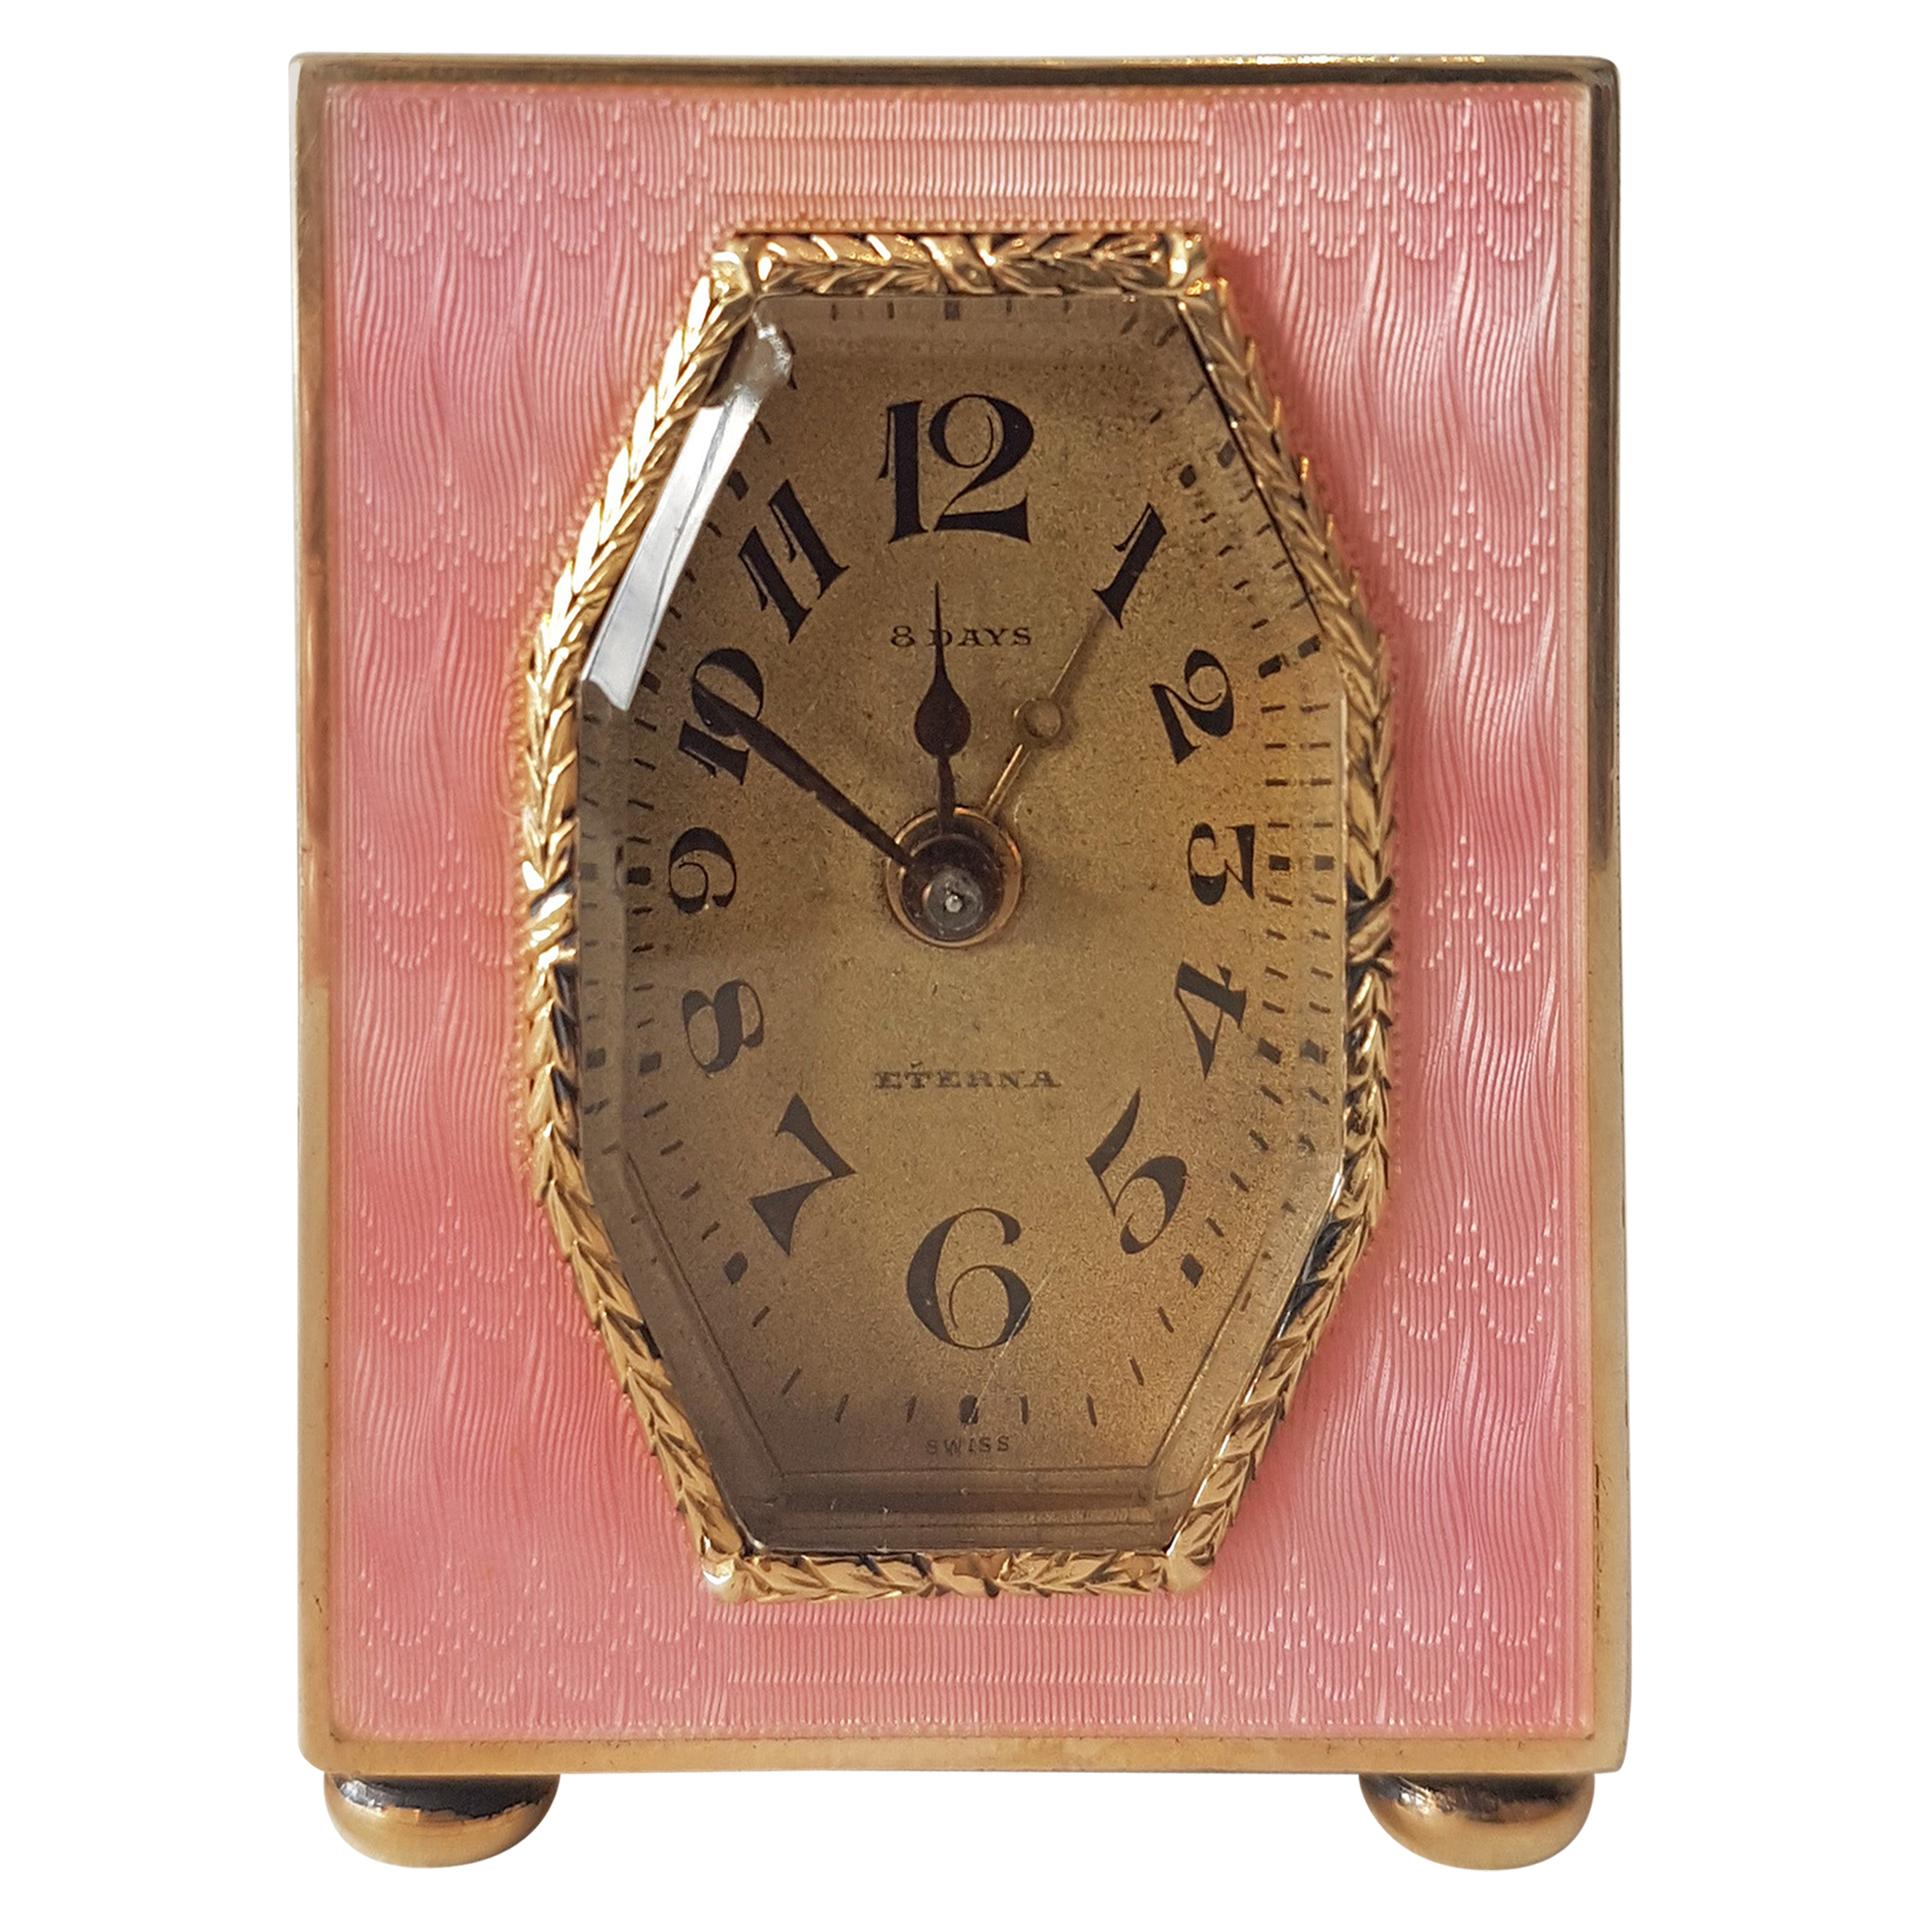 Pink Guilloche Enamel Silver Gilt Sub-Miniature Carriage Clock with Alarm